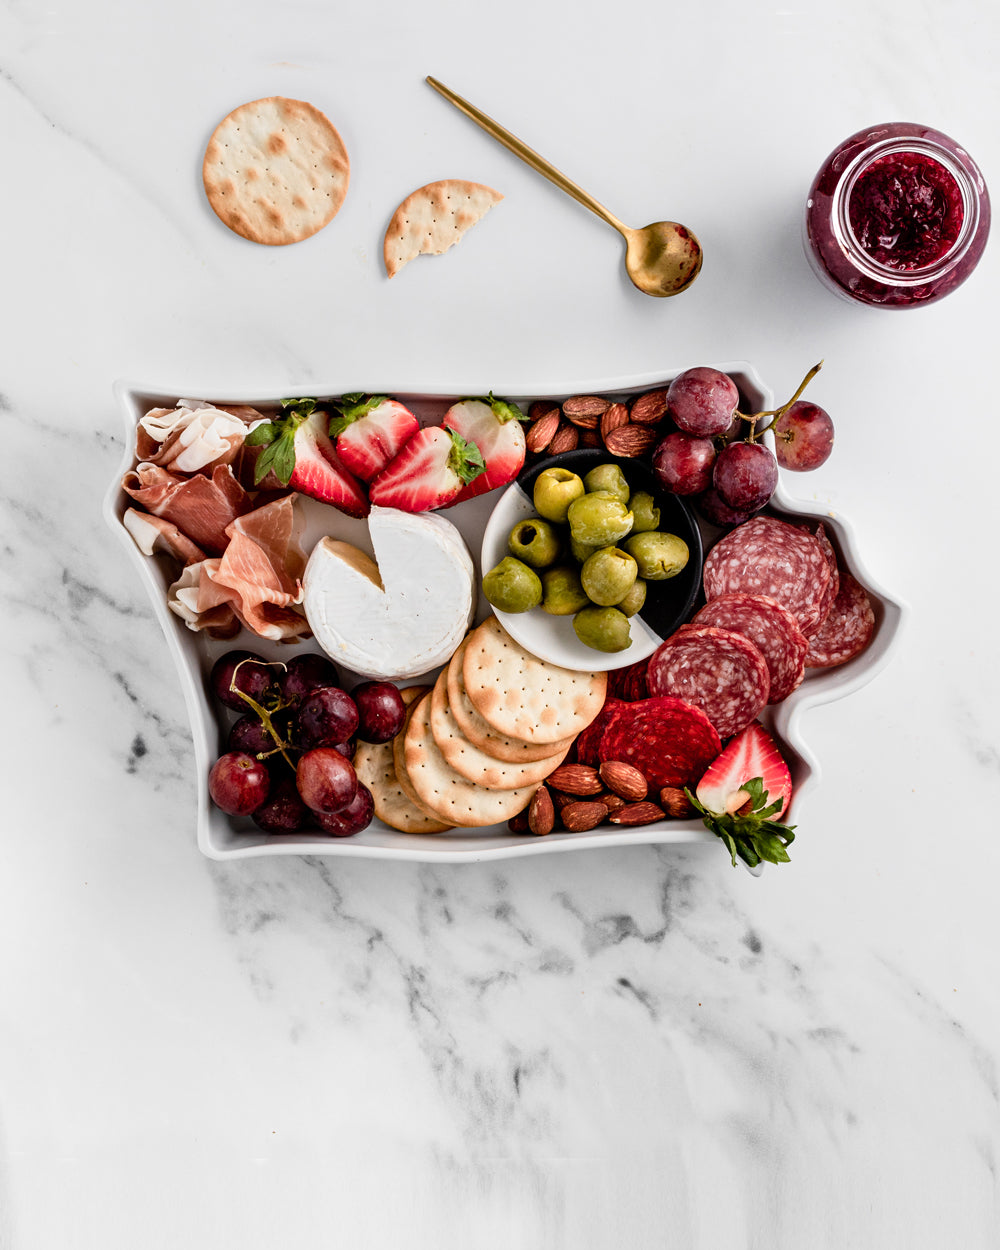 charcuterie board with cheese and cured meats in a Iowa shaped serving tray platter dish